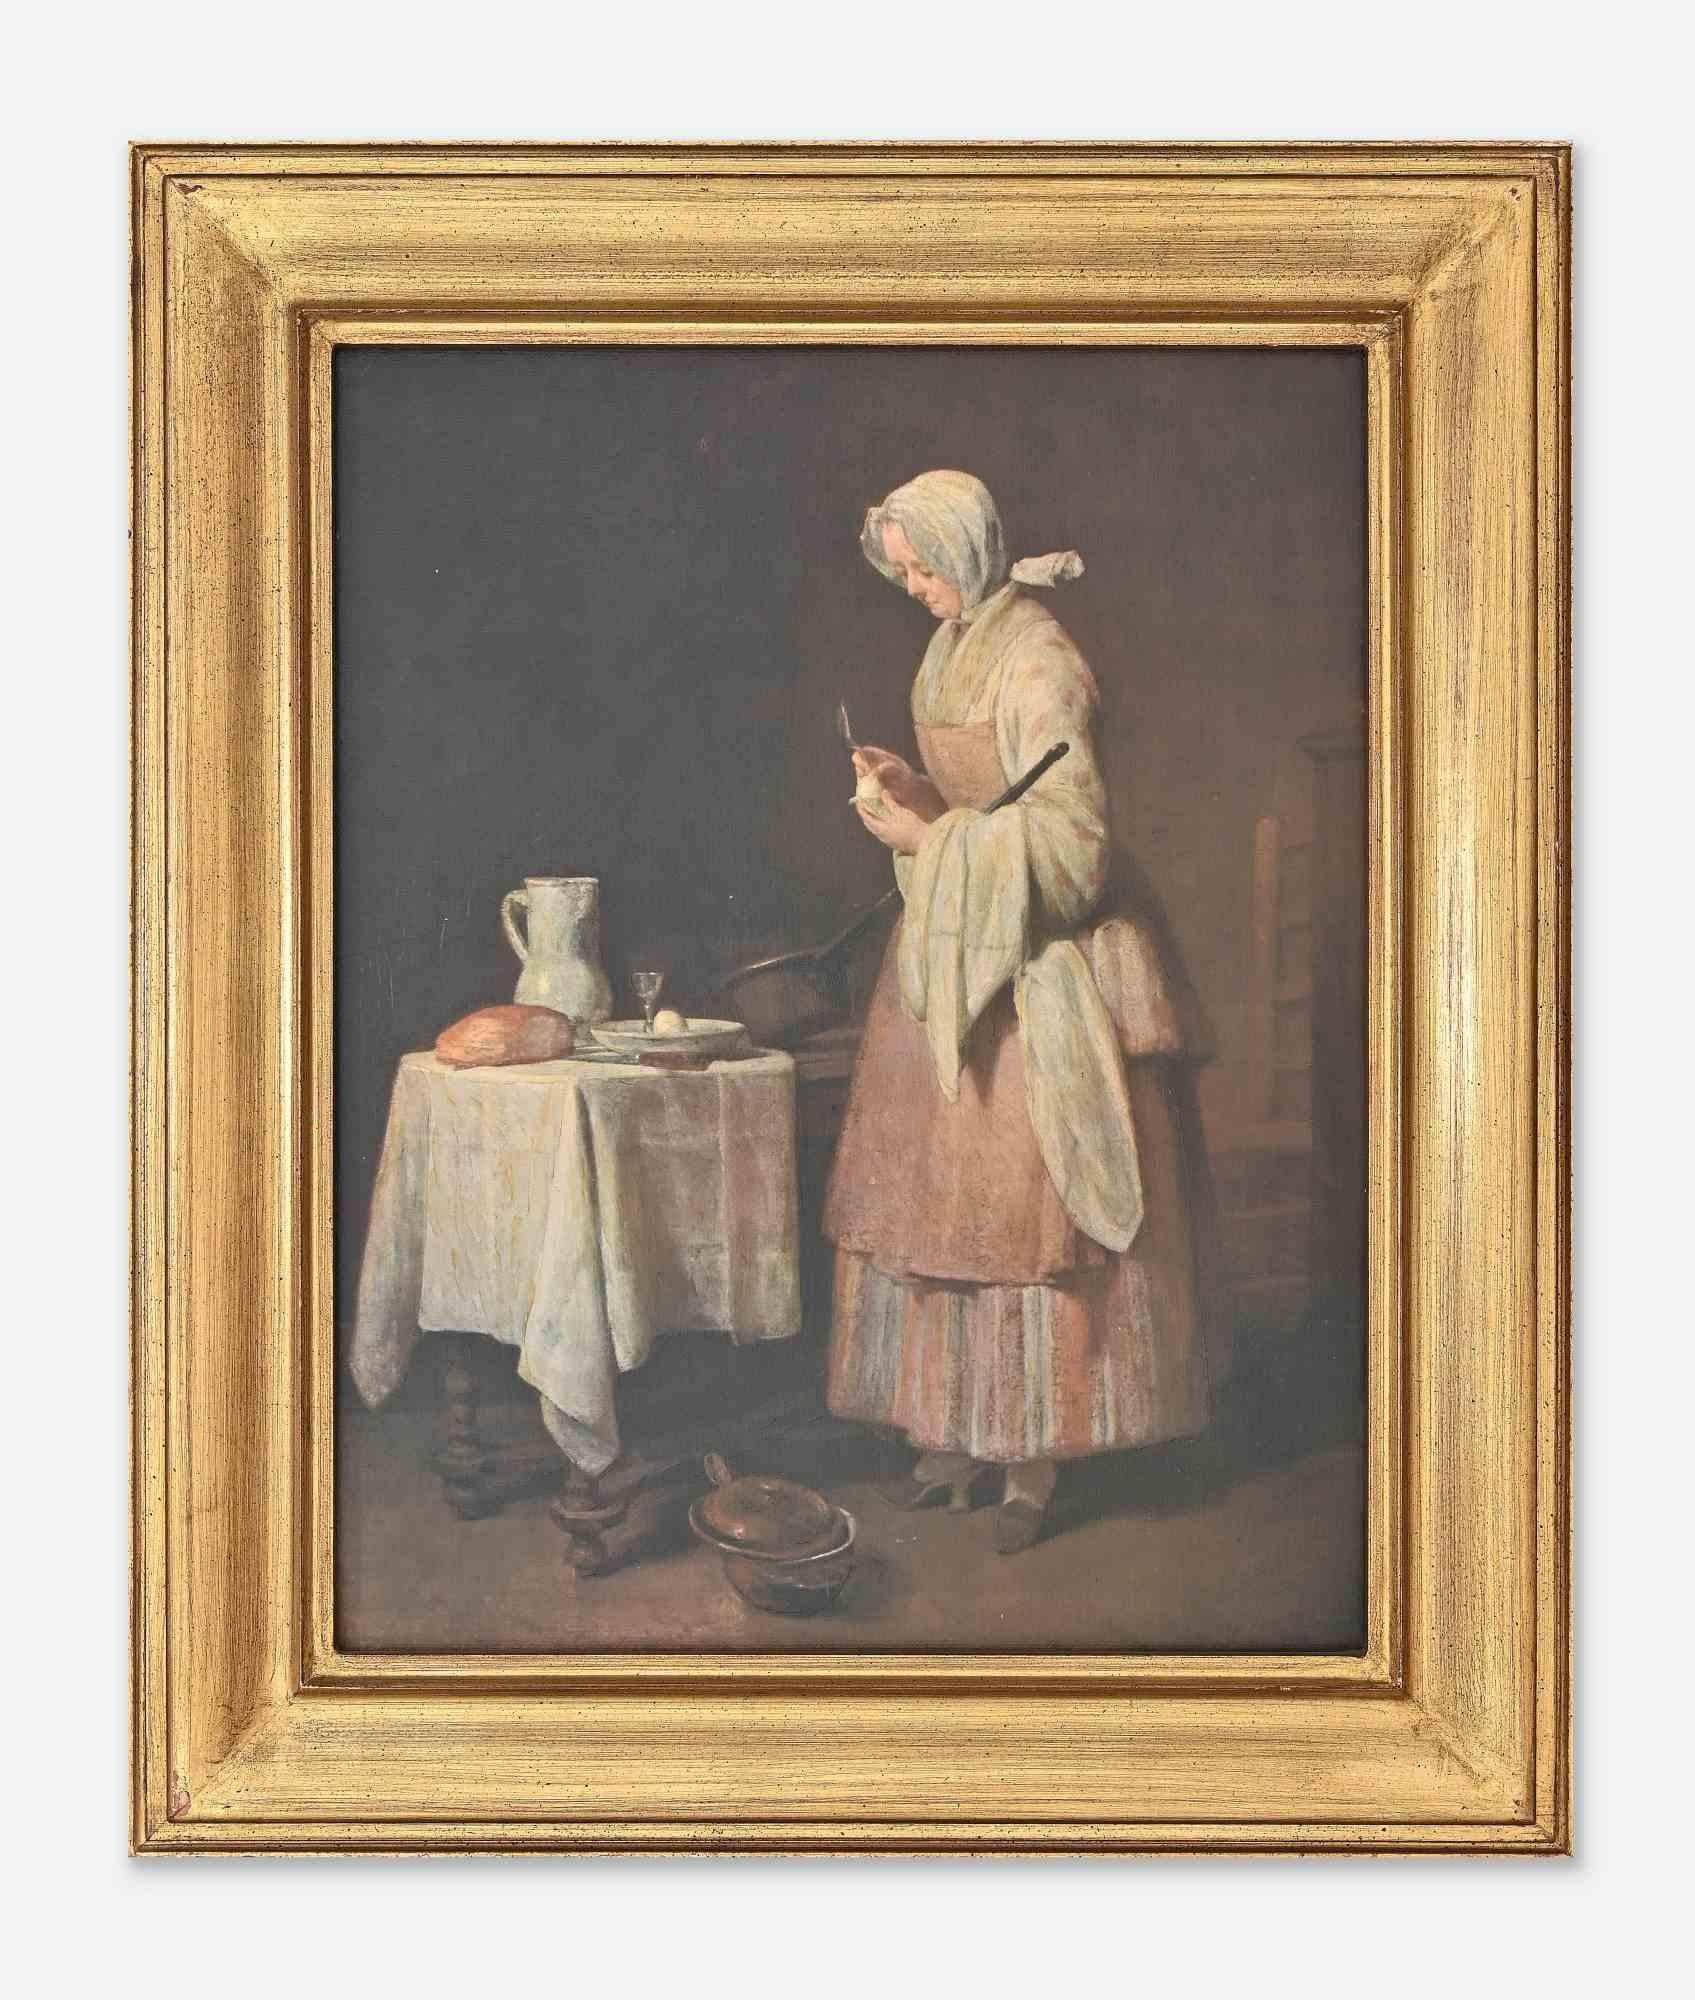 Unknown Portrait Painting - The Attentive Nurse - Oil Painting on Canvas - 1980s